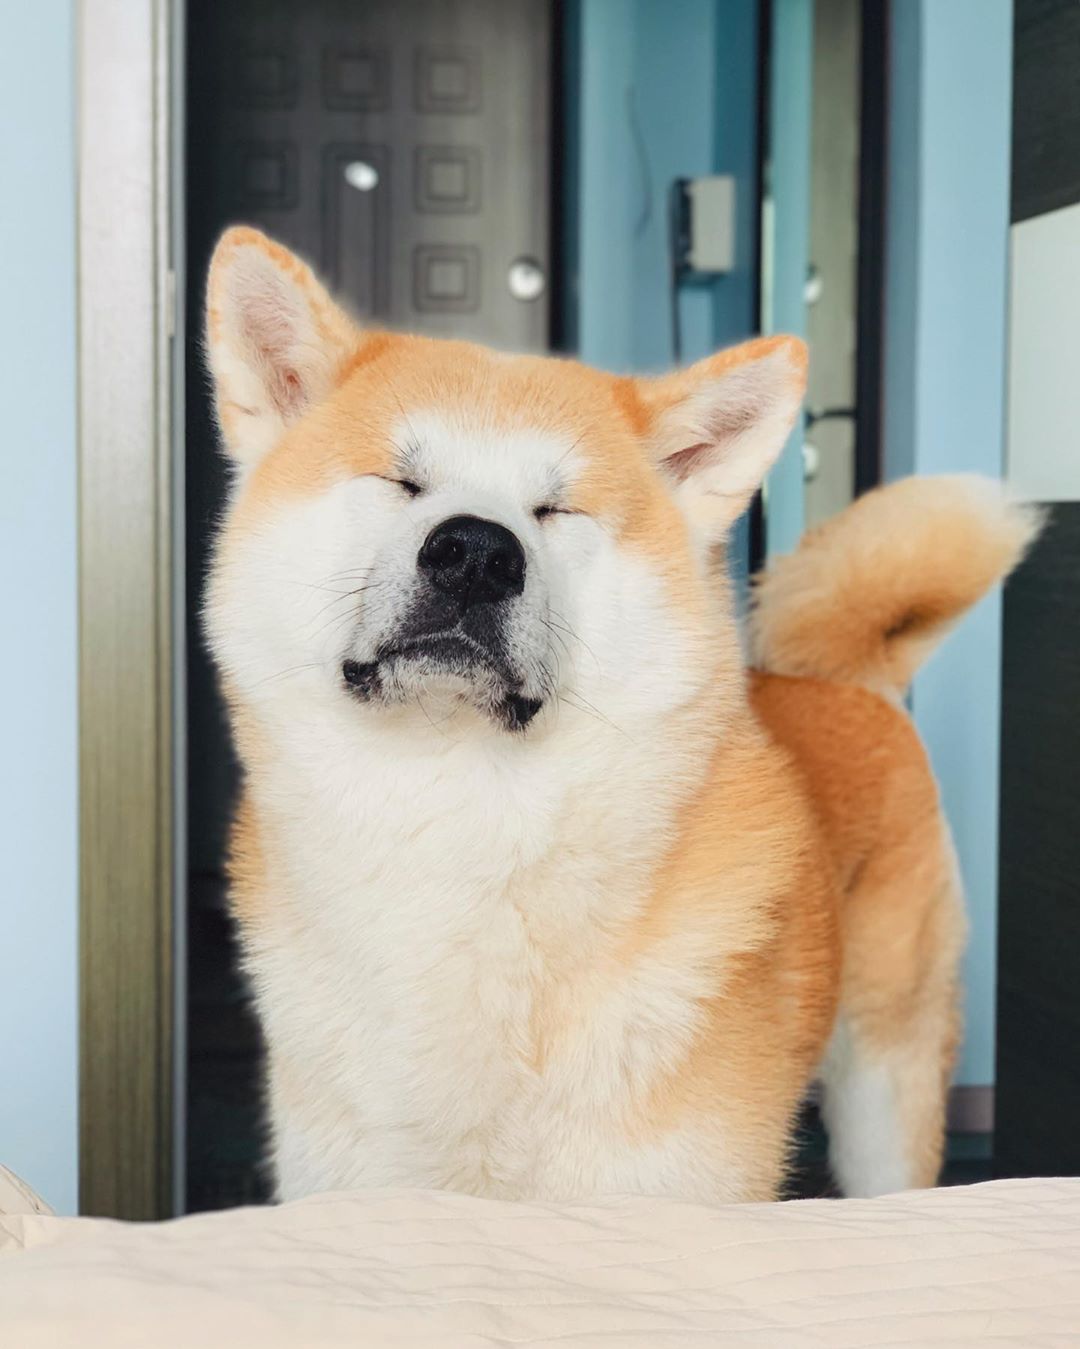 An Akita Inu standing behind the foot of the bed with its eyes closed